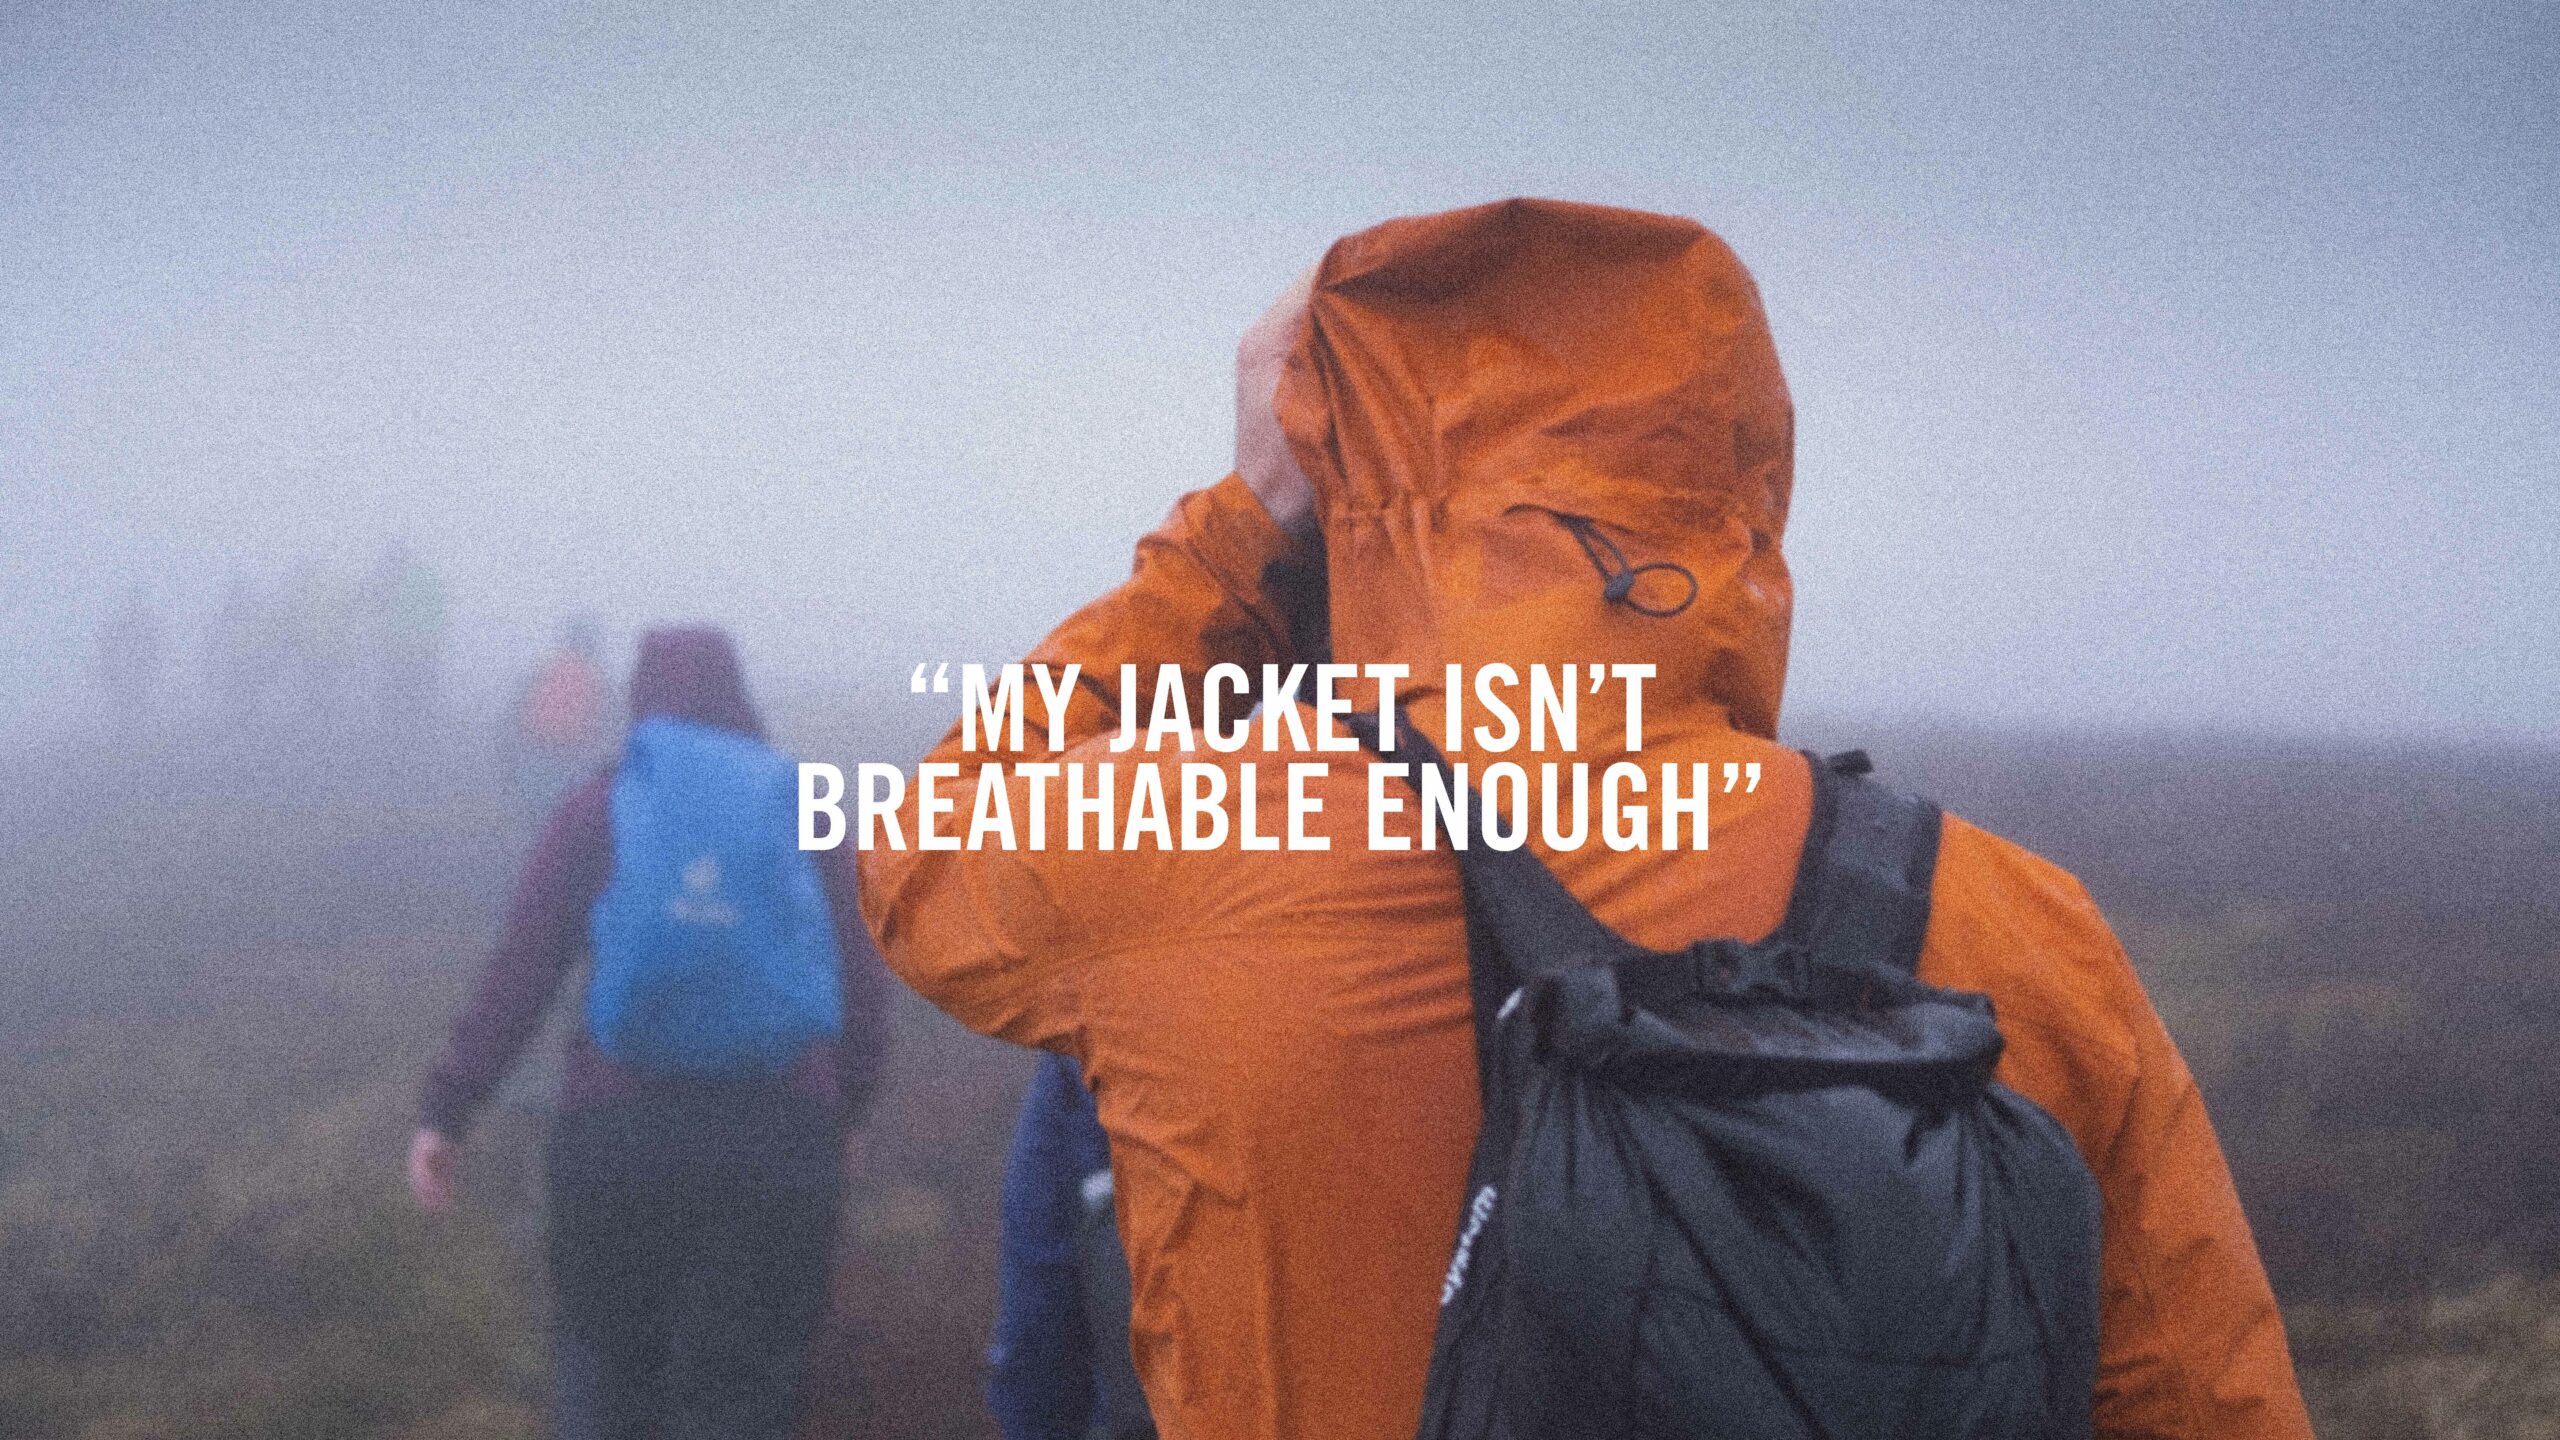 “My Jacket Isn’t Breathable Enough!”